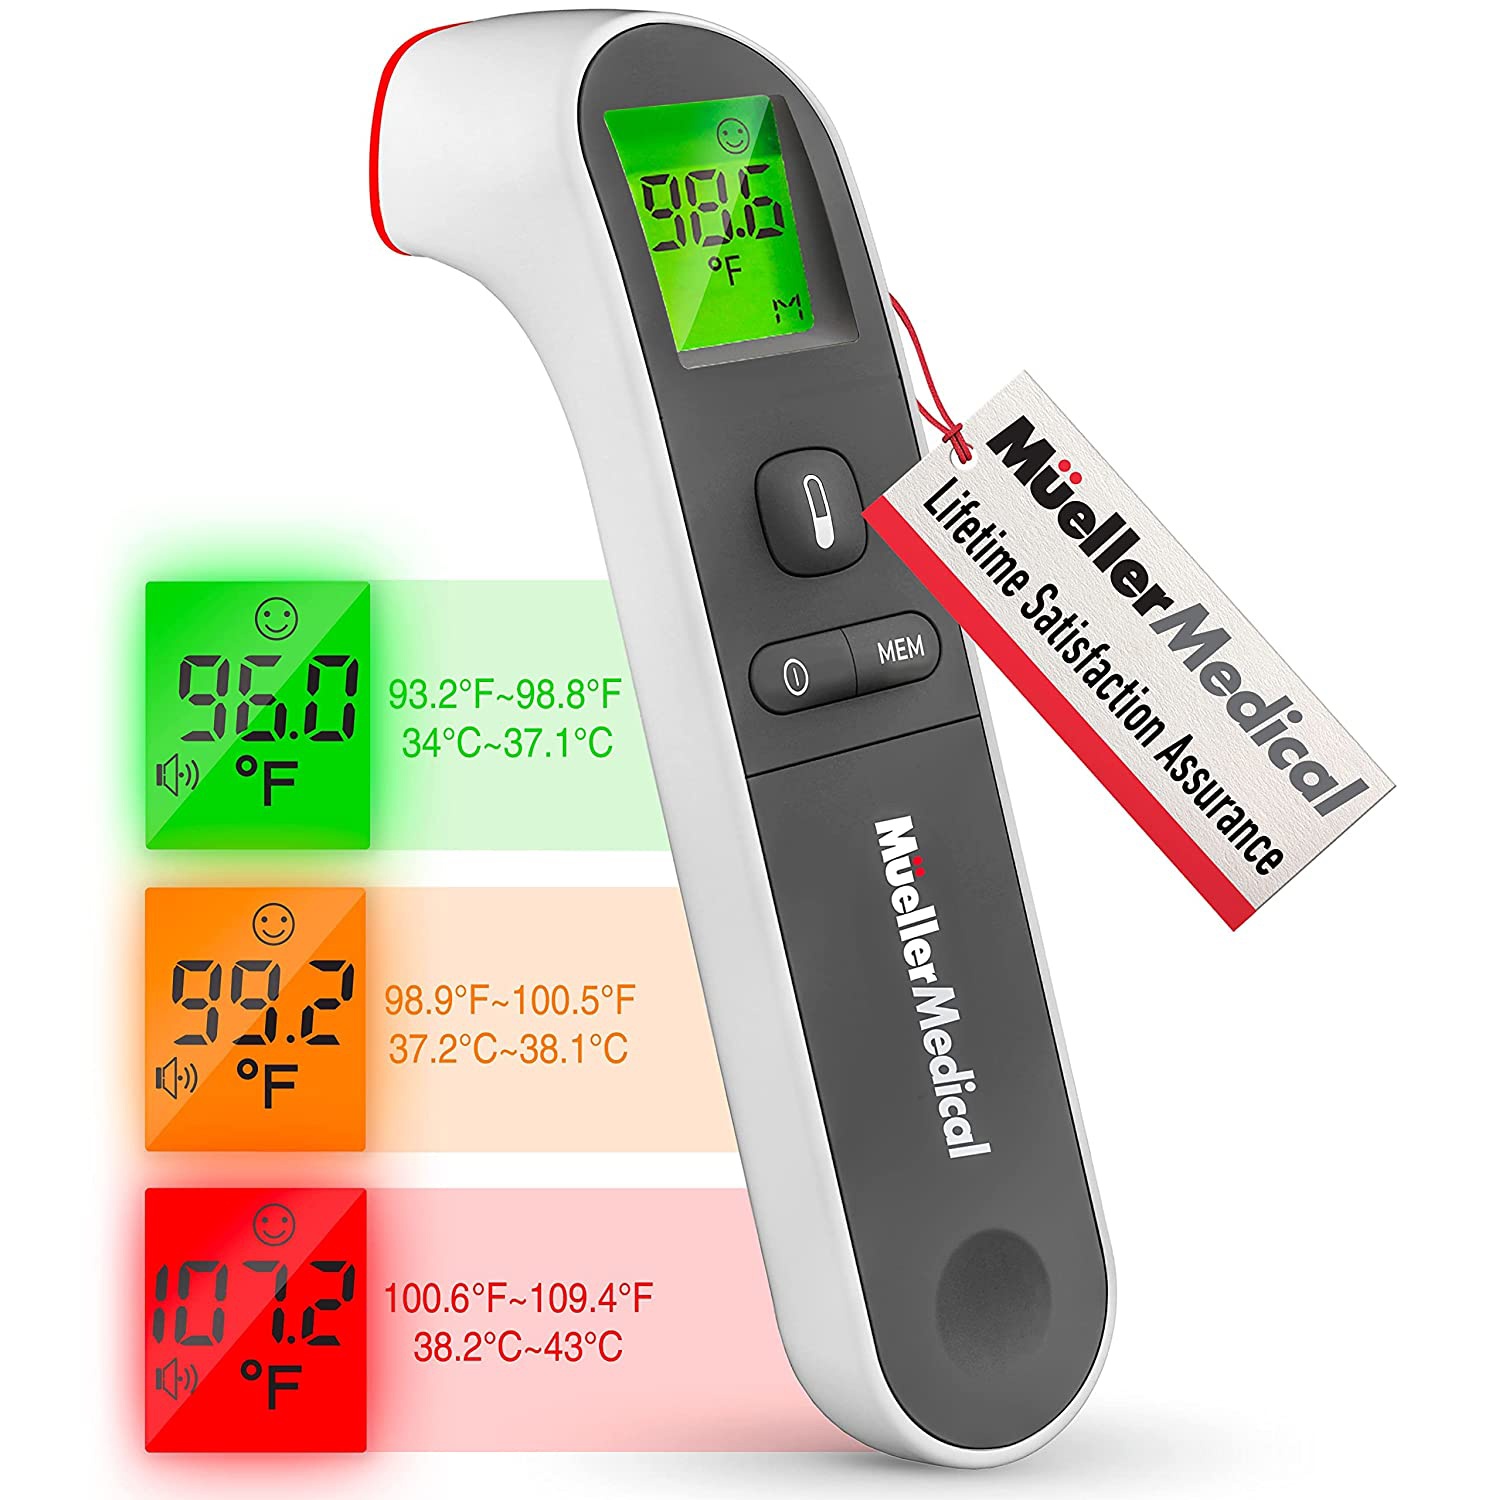 【US Stock Arrived 2-6 Days】Forehead Thermometer Non-Contact Infrared for Adults Acurate Reading with LCD Display and Temperature Alert ℃/℉ Adjustable 